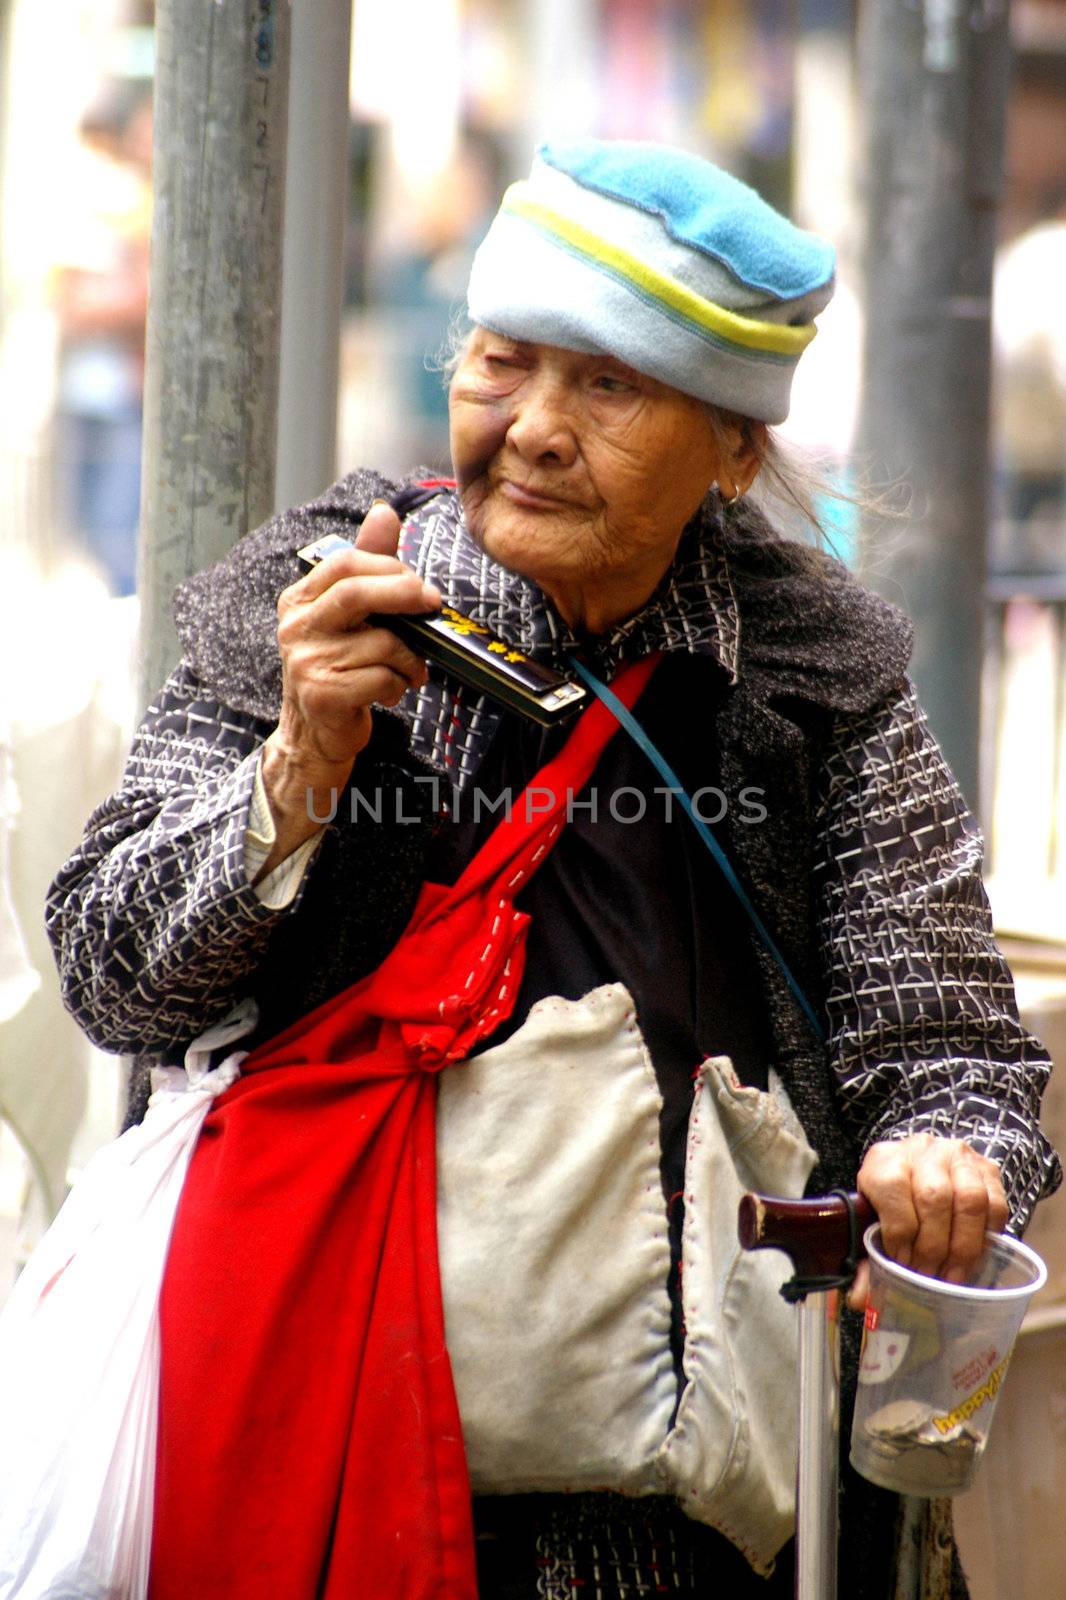 Old woman playing music along the street in Hong Kong by kawing921